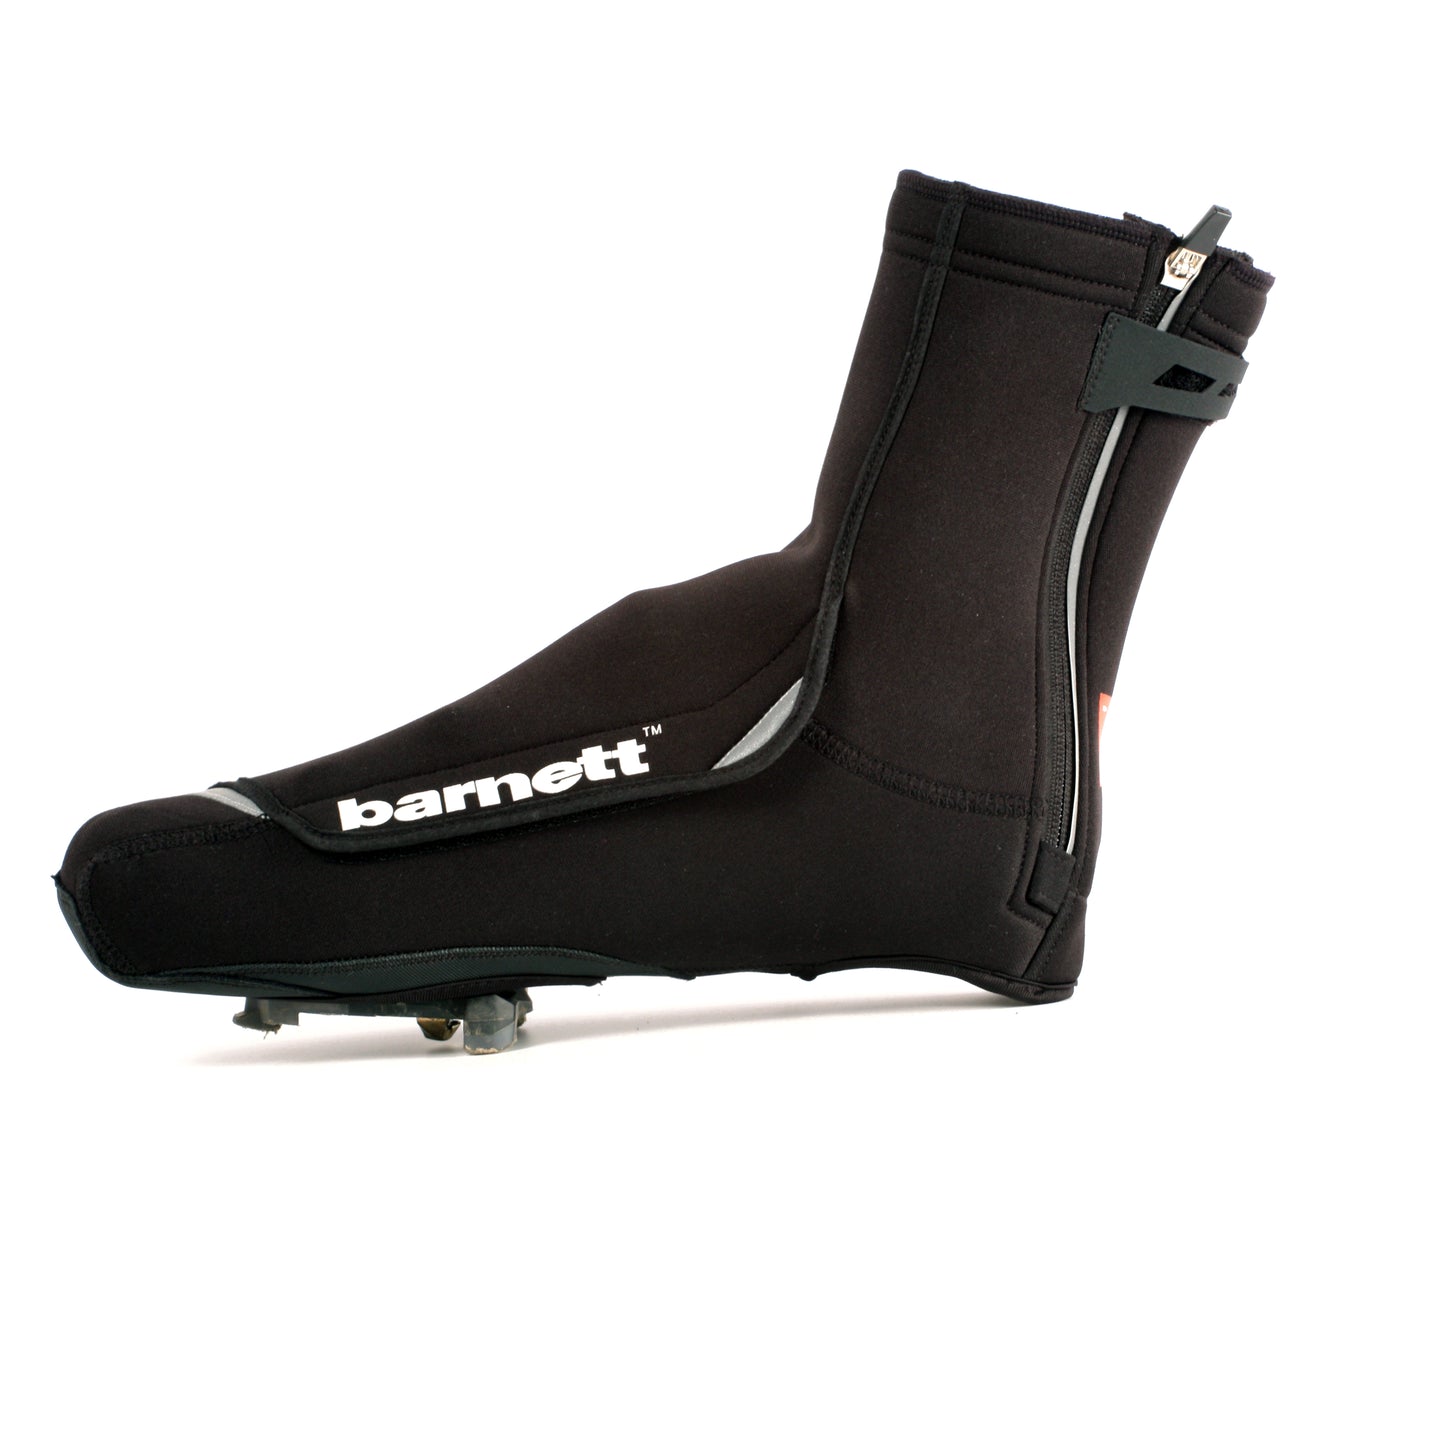 BSP-03 Cycling covershoes, Warm and water-repellent.